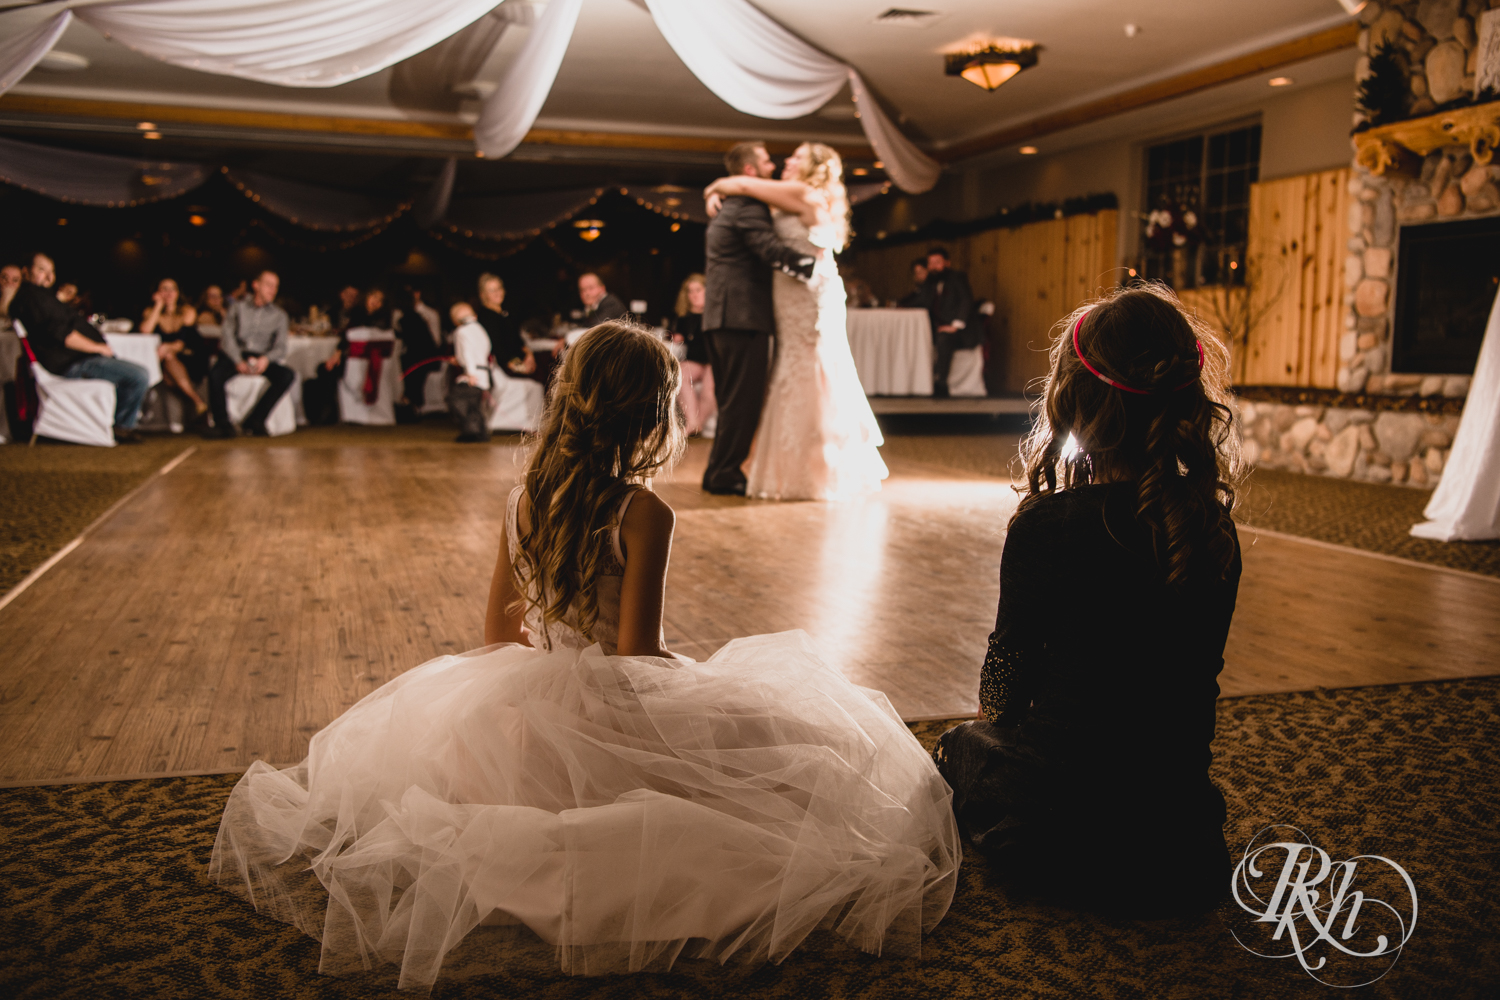 Girls watch bride and groom have first dance during winter wedding reception at Whitefish Lodge in Crosslake, Minnesota.